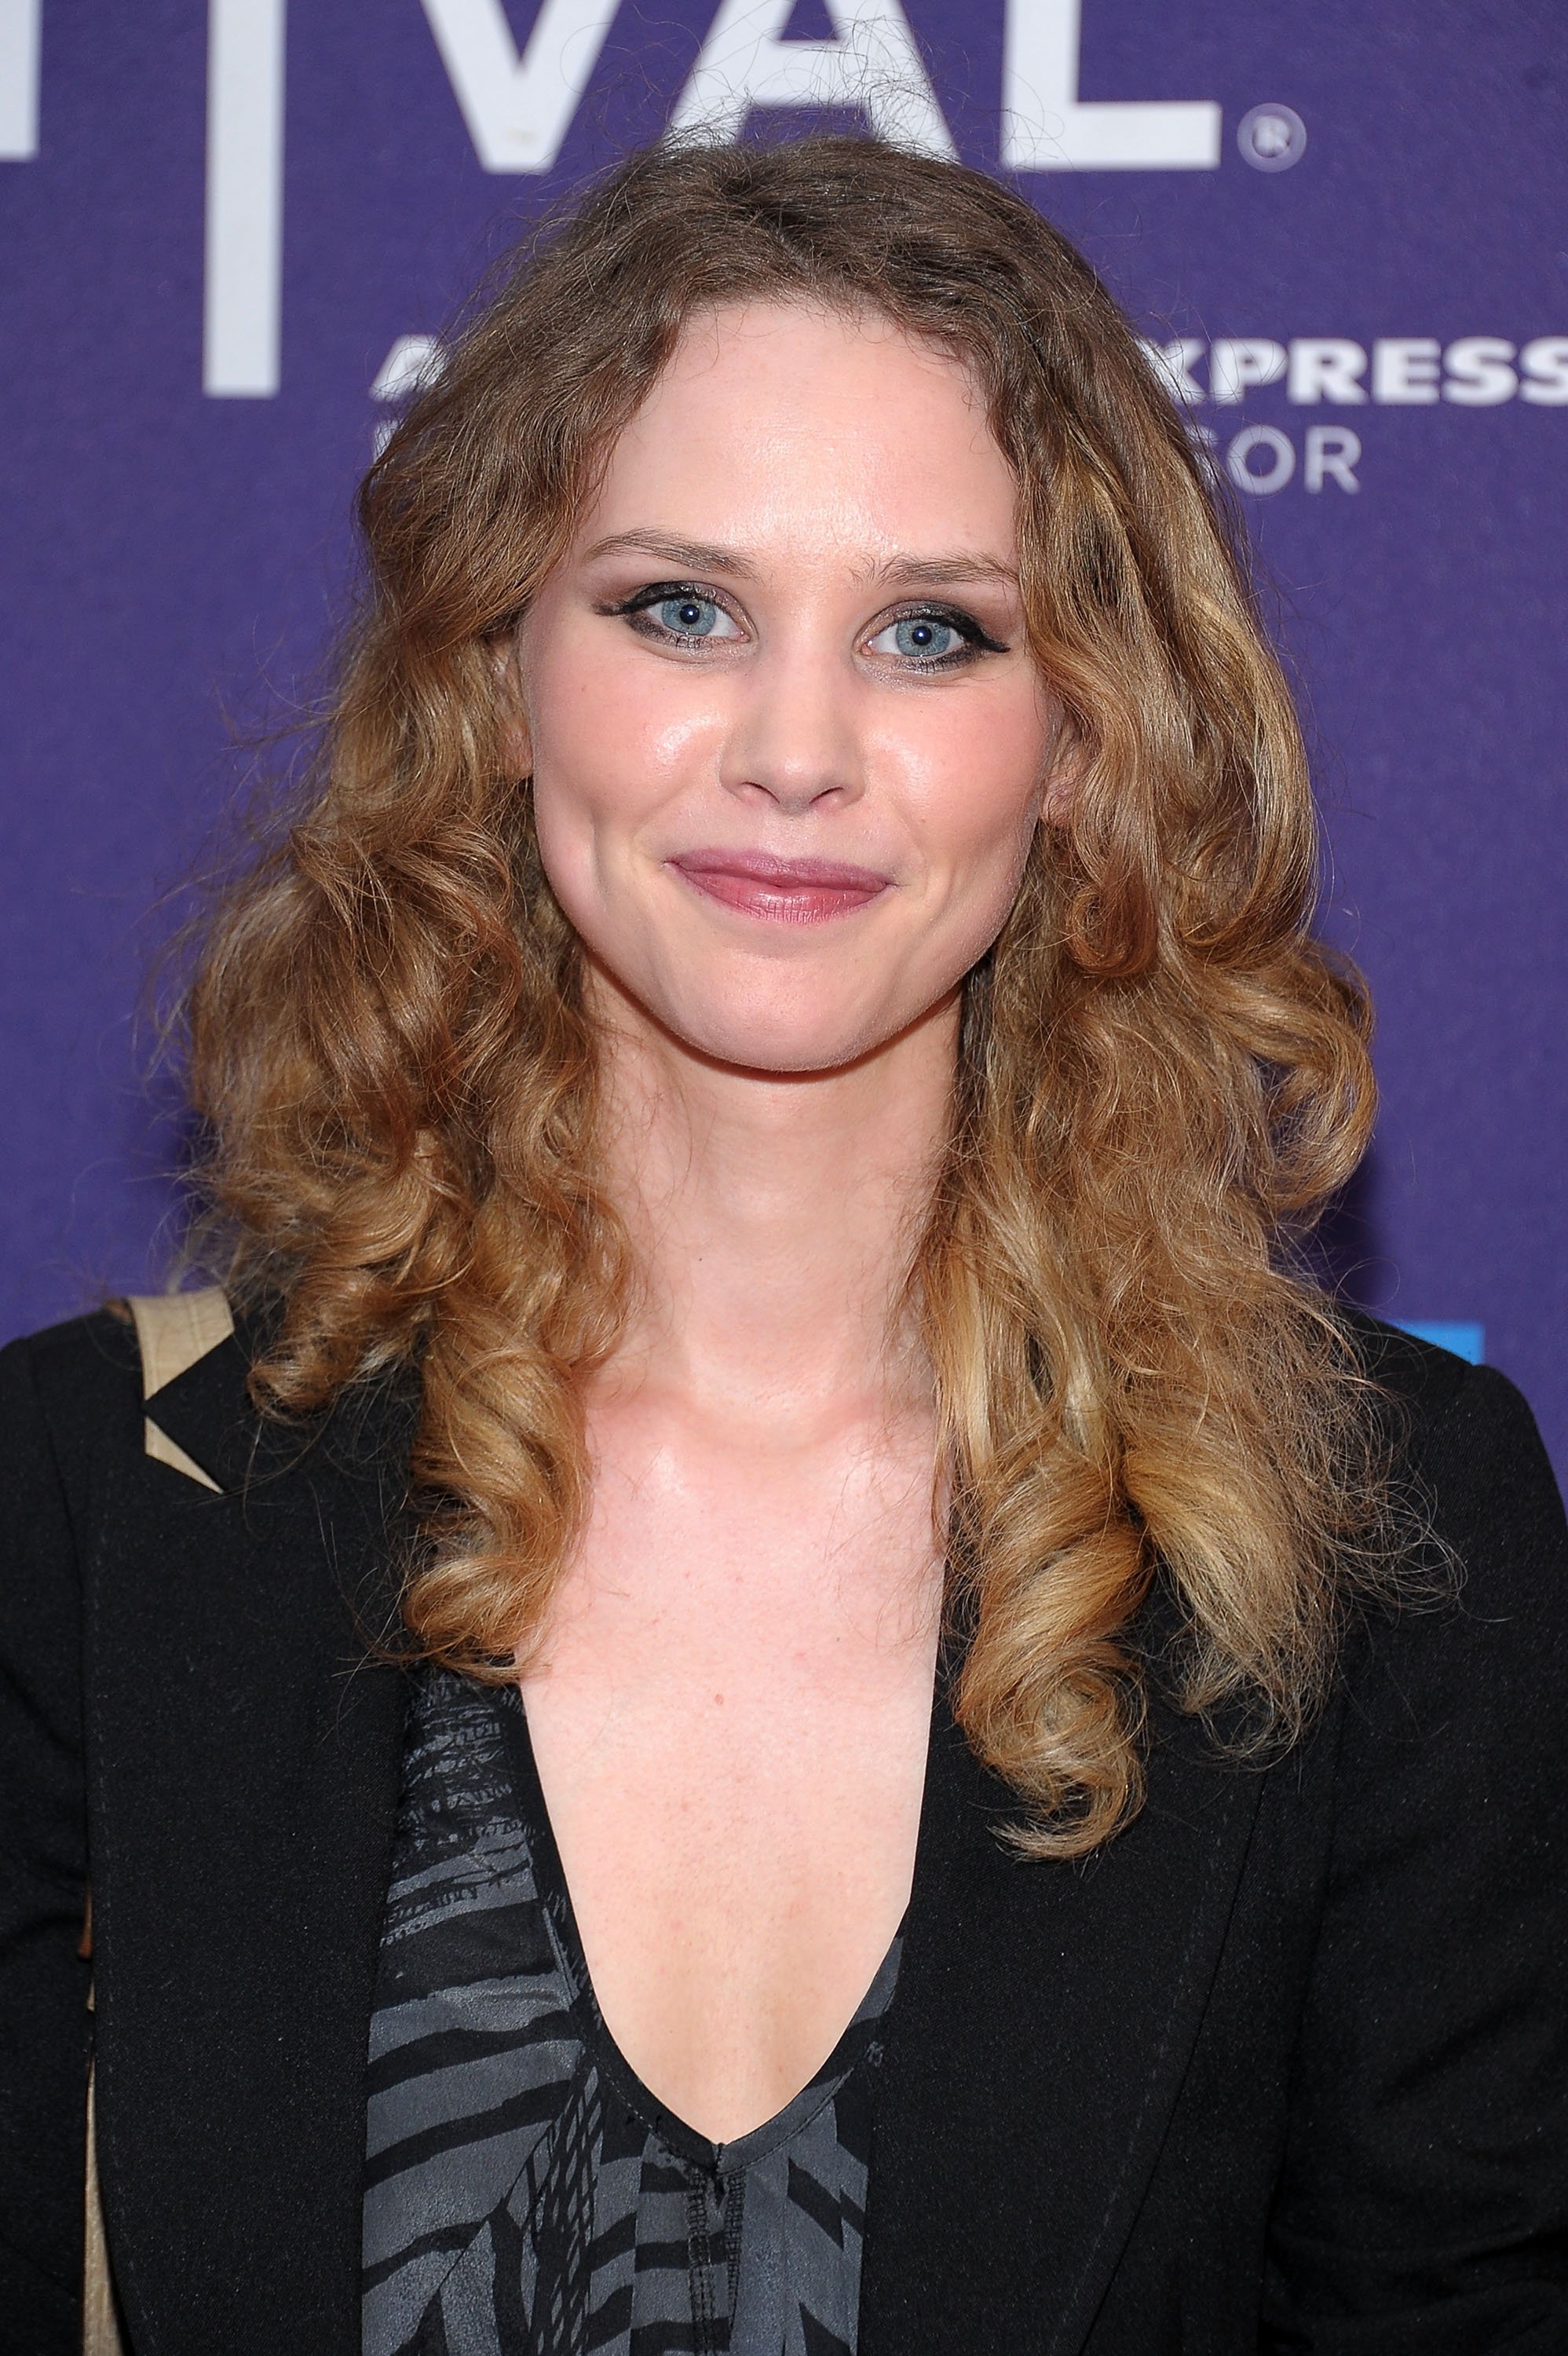 Juliette Bonass at the 2011 Tribeca Film Festival on April 23, 2011, in New York | Source: Getty Images